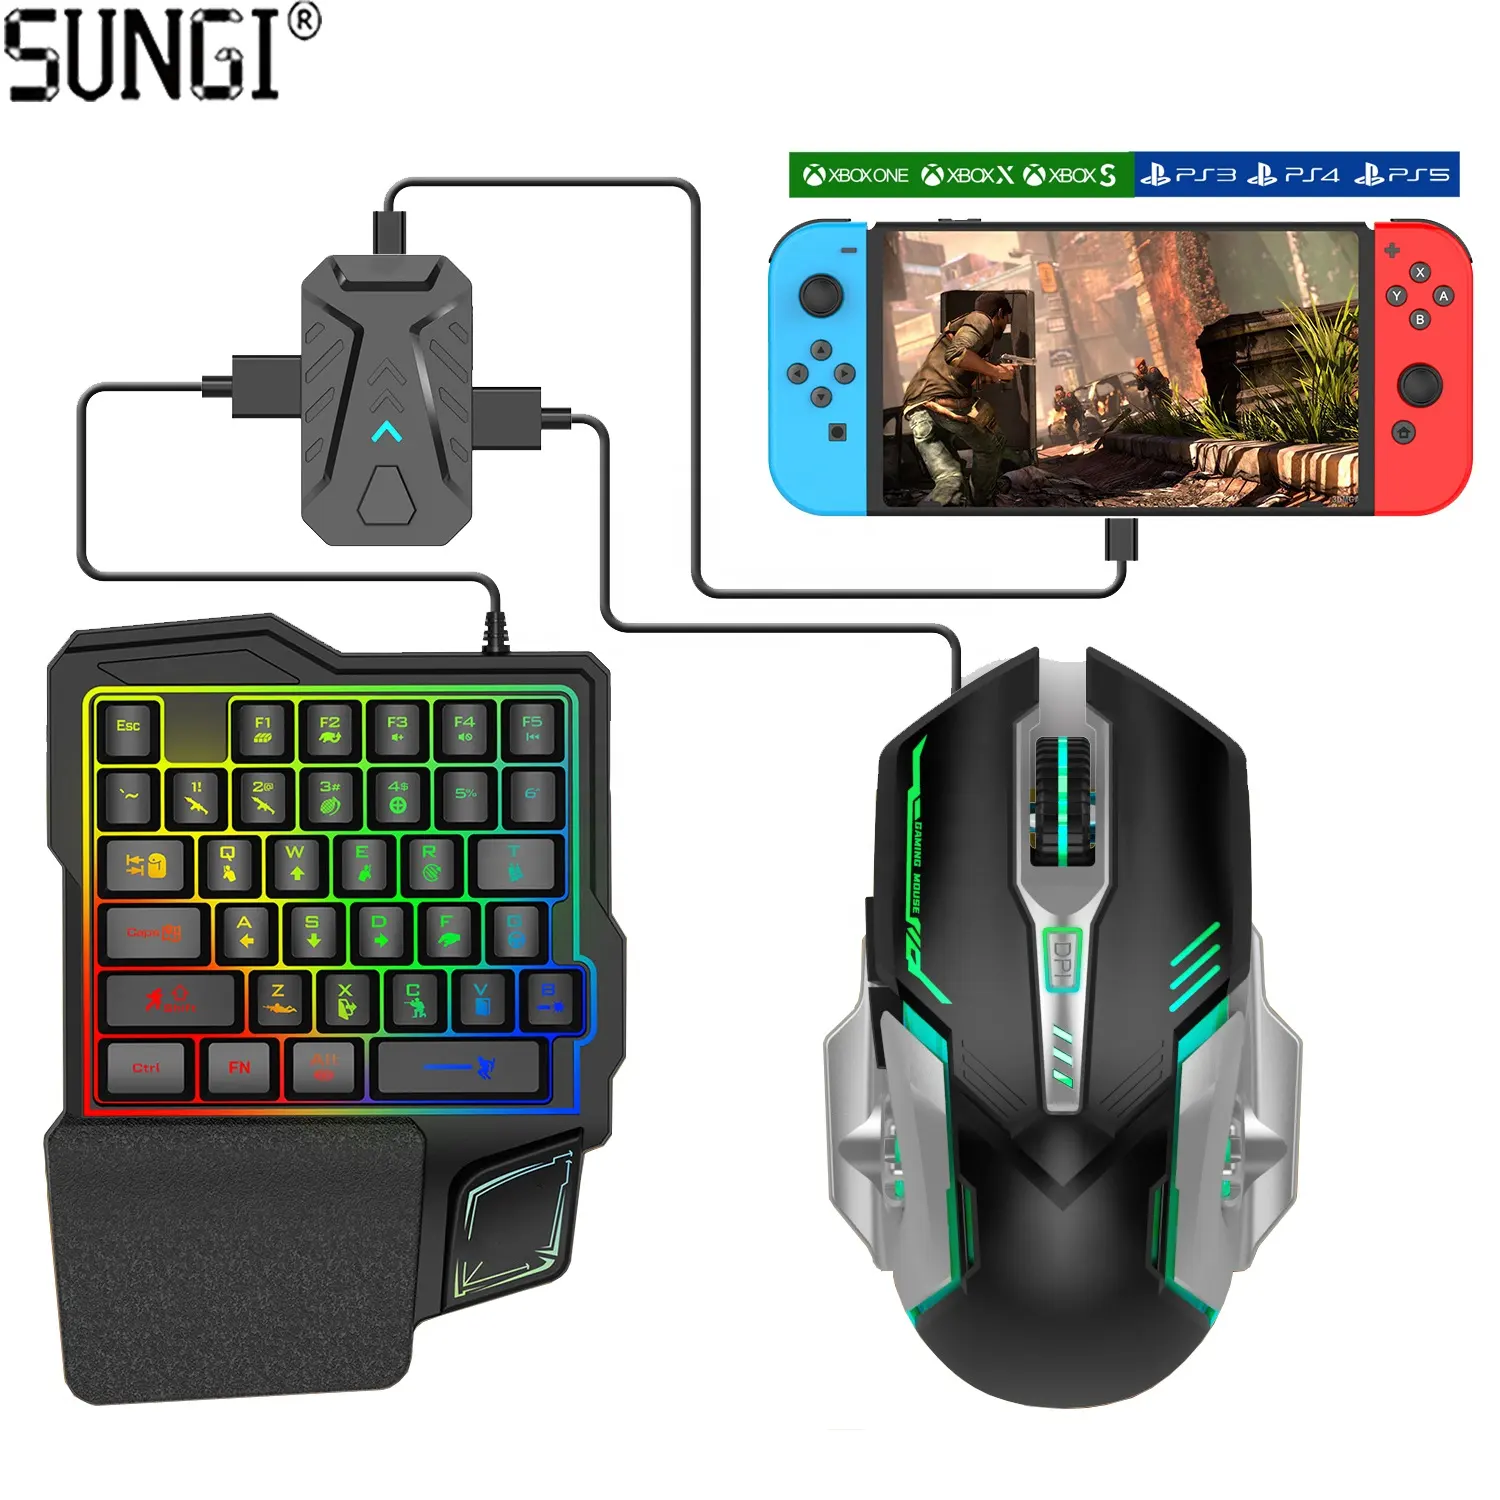 7-in-1 One Hand Gaming Keyboard Mouse and Converter Pack Backlight for PS3/PS4/PS5/Xbox360/XboxONE/Xbox Series X/Switch Consoles